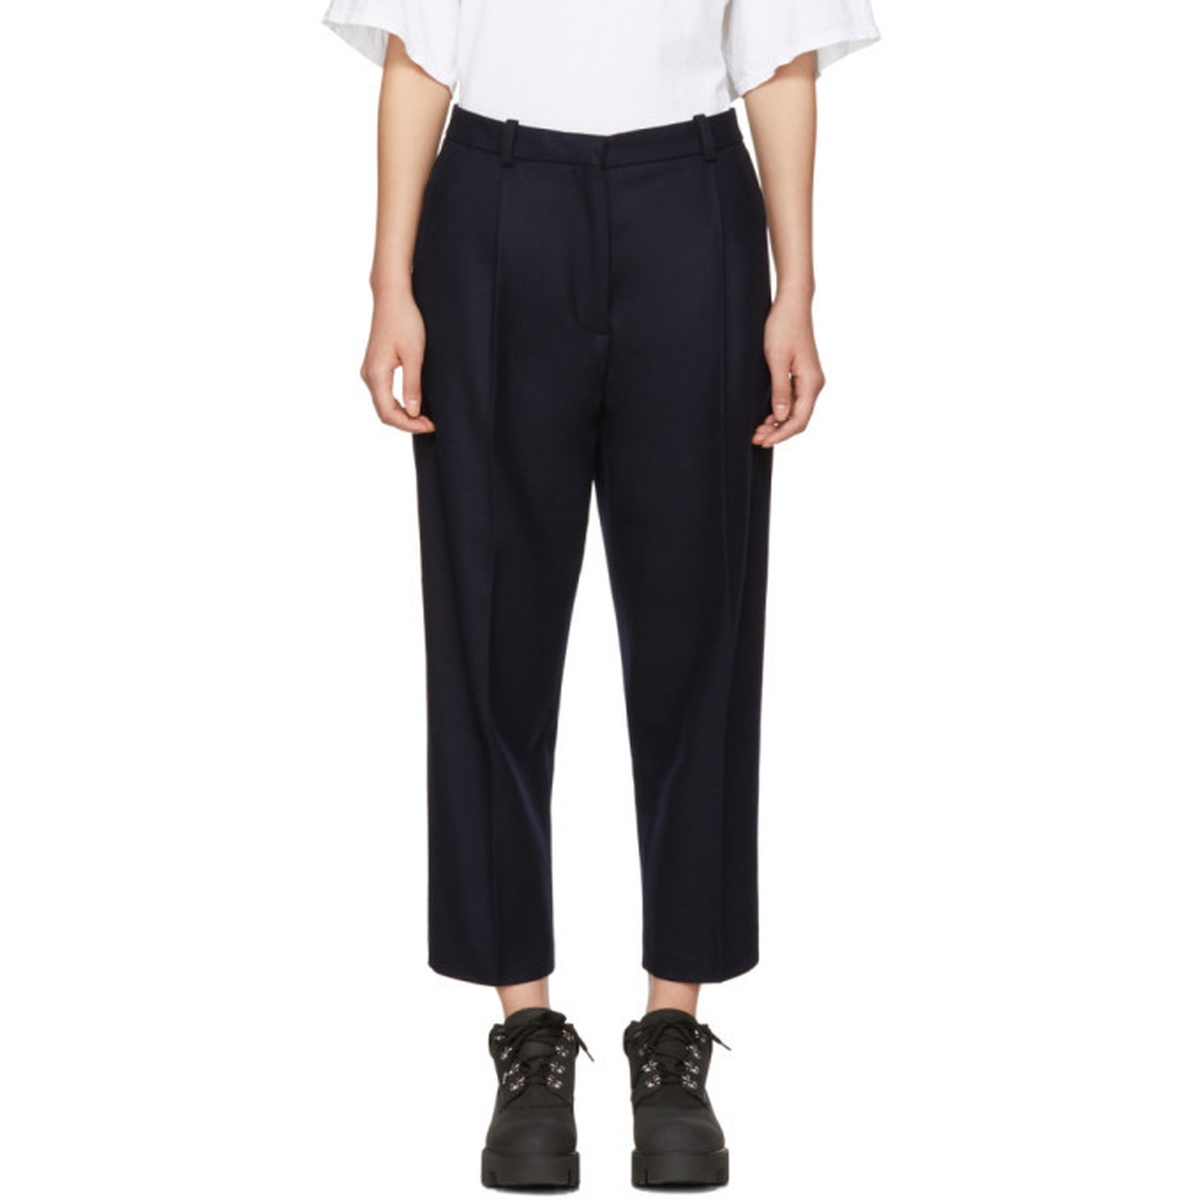 Regular Fit Cropped trousers - Navy blue - Men | H&M IN